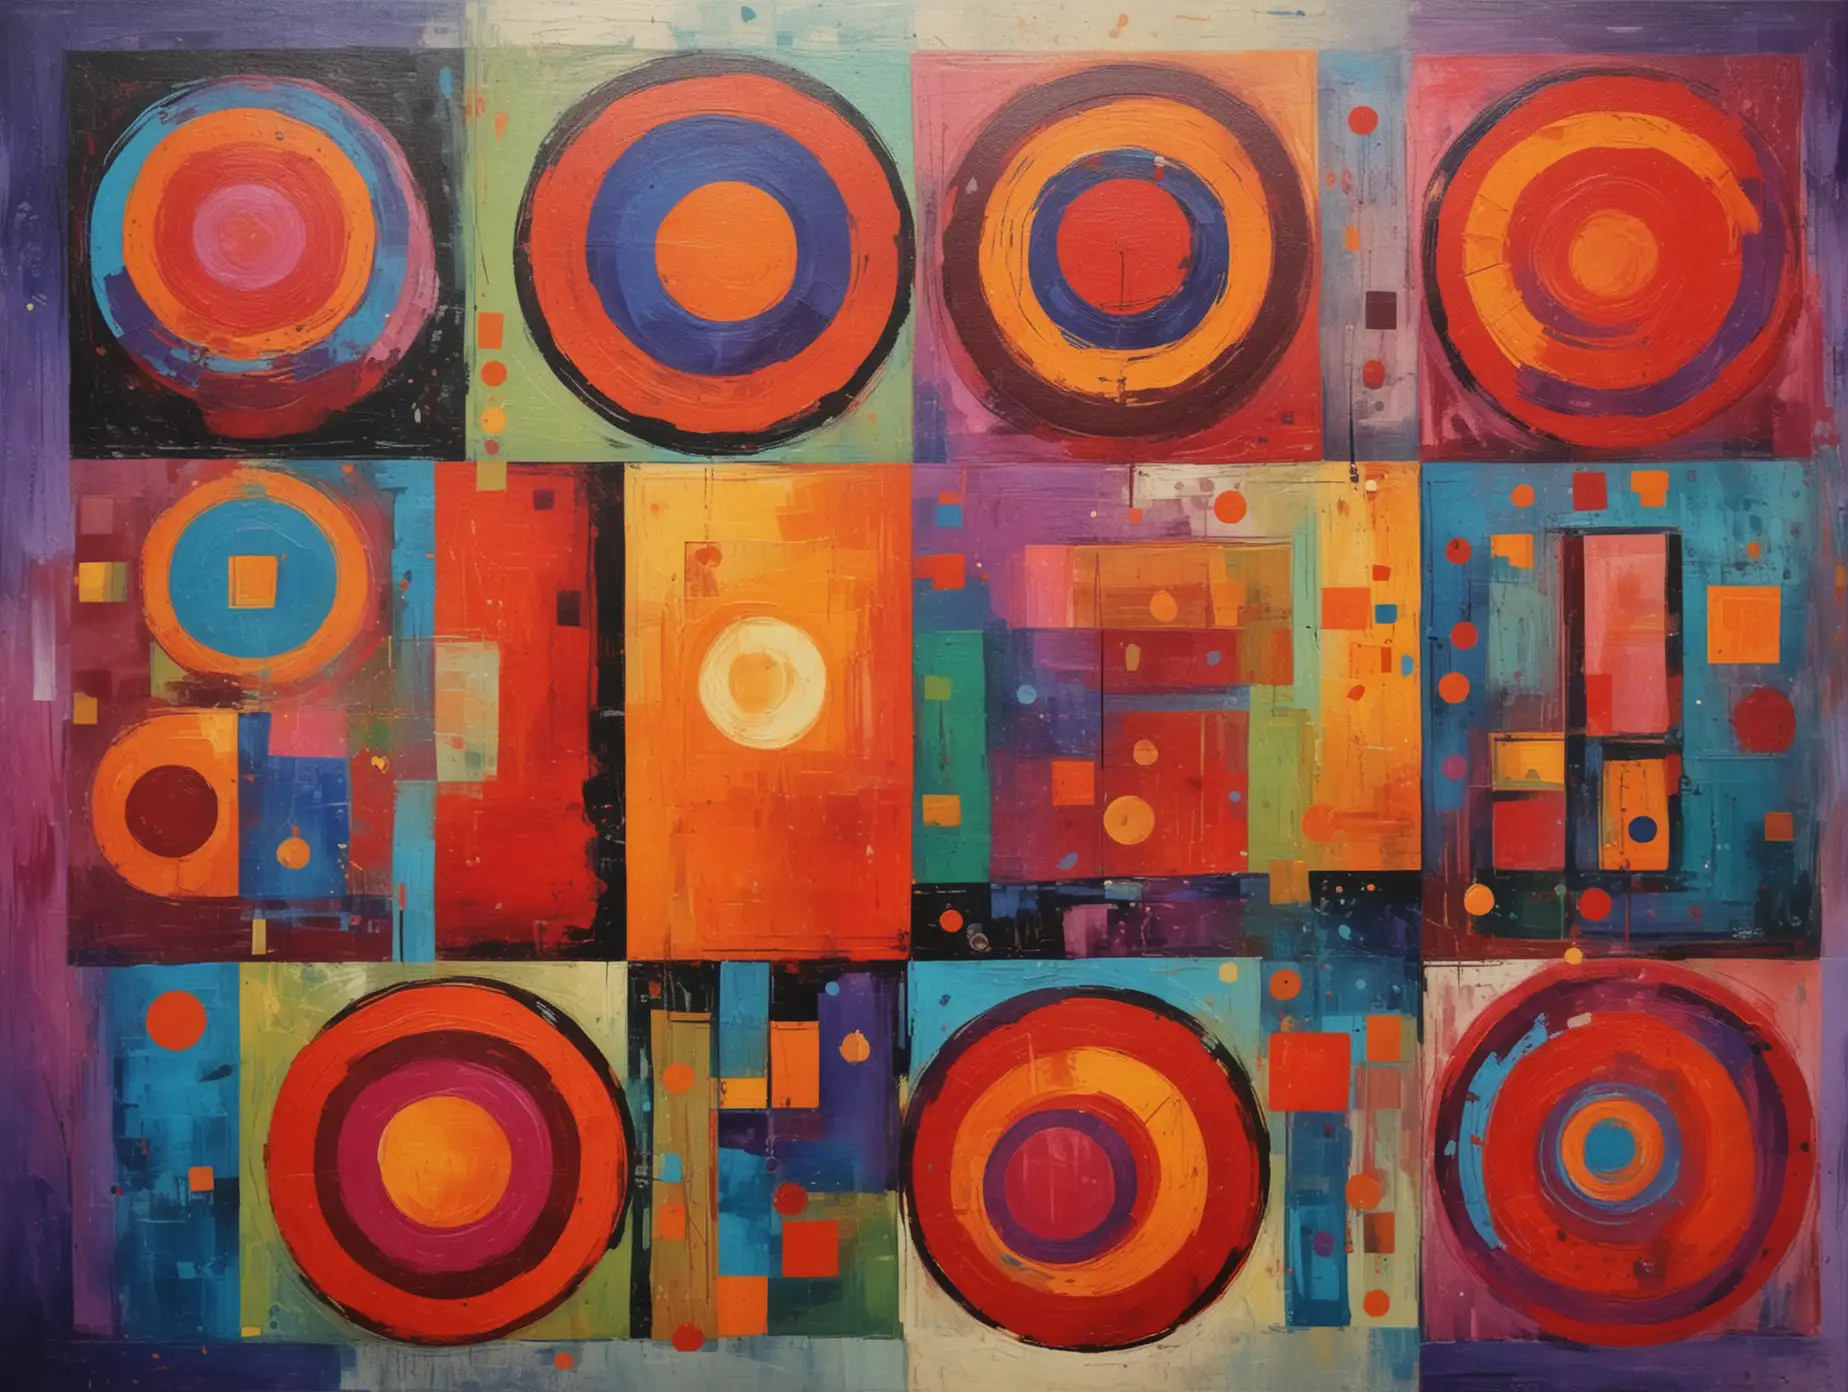 Vibrant Abstract Geometric Painting with Circles and Squares